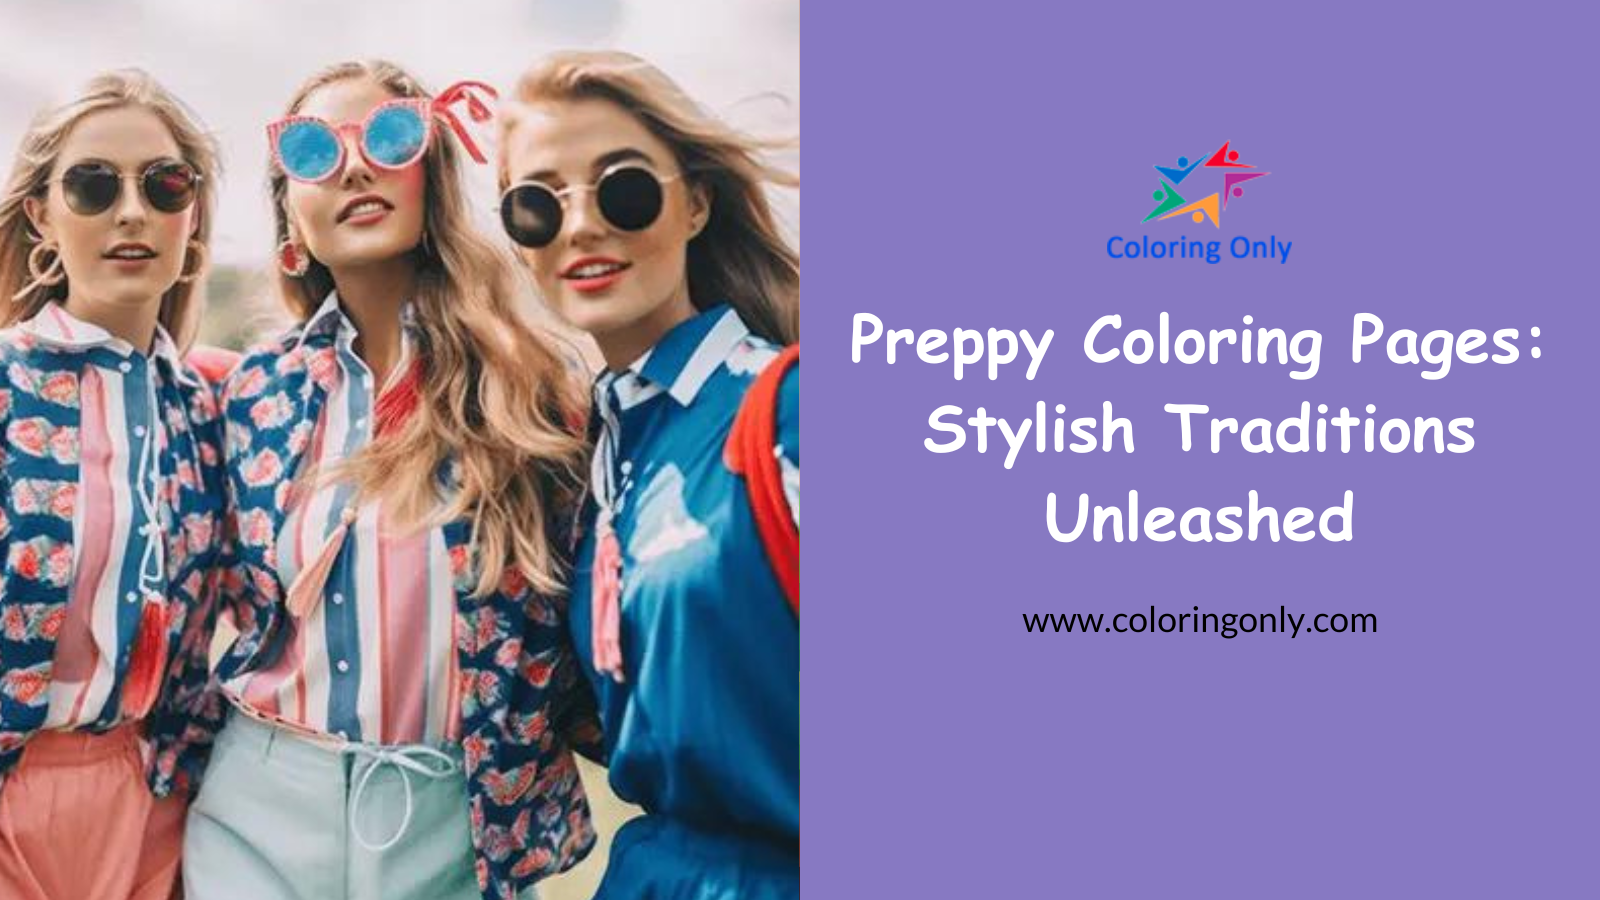 Preppy Coloring Pages: Stylish Traditions Unleashed